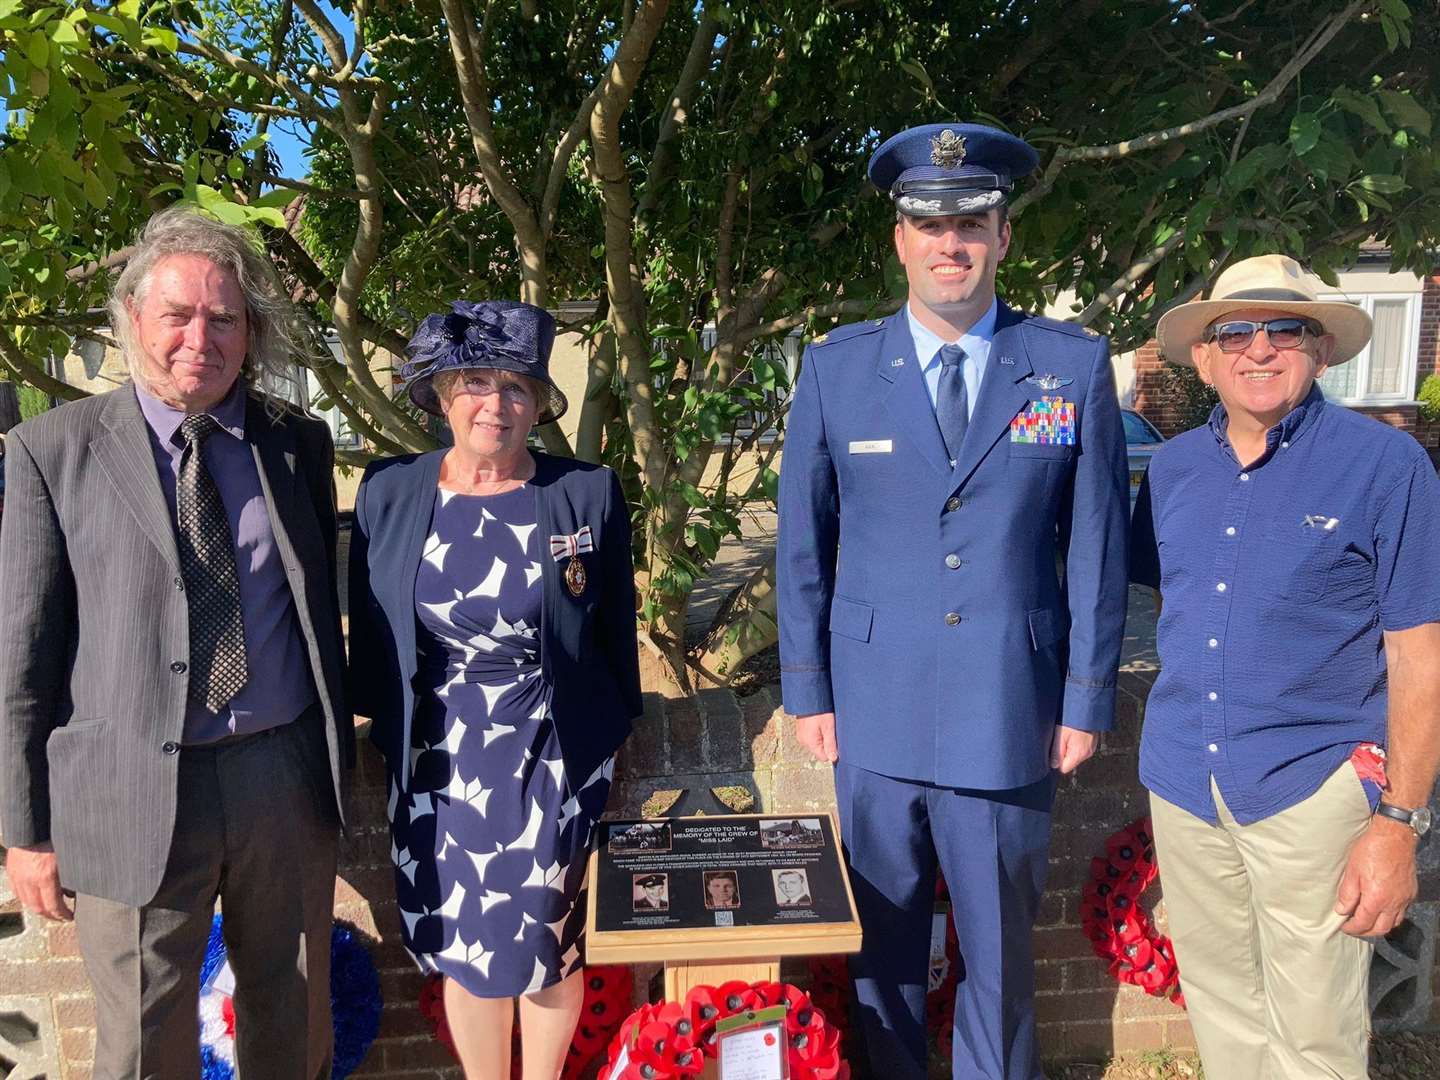 Memorial organisers Mark Ratcliff, left, and Steve Foster, right, with Major David Nan, of the USAF, and Essex Deputy Lord Lieutenant Rosemary Padfield